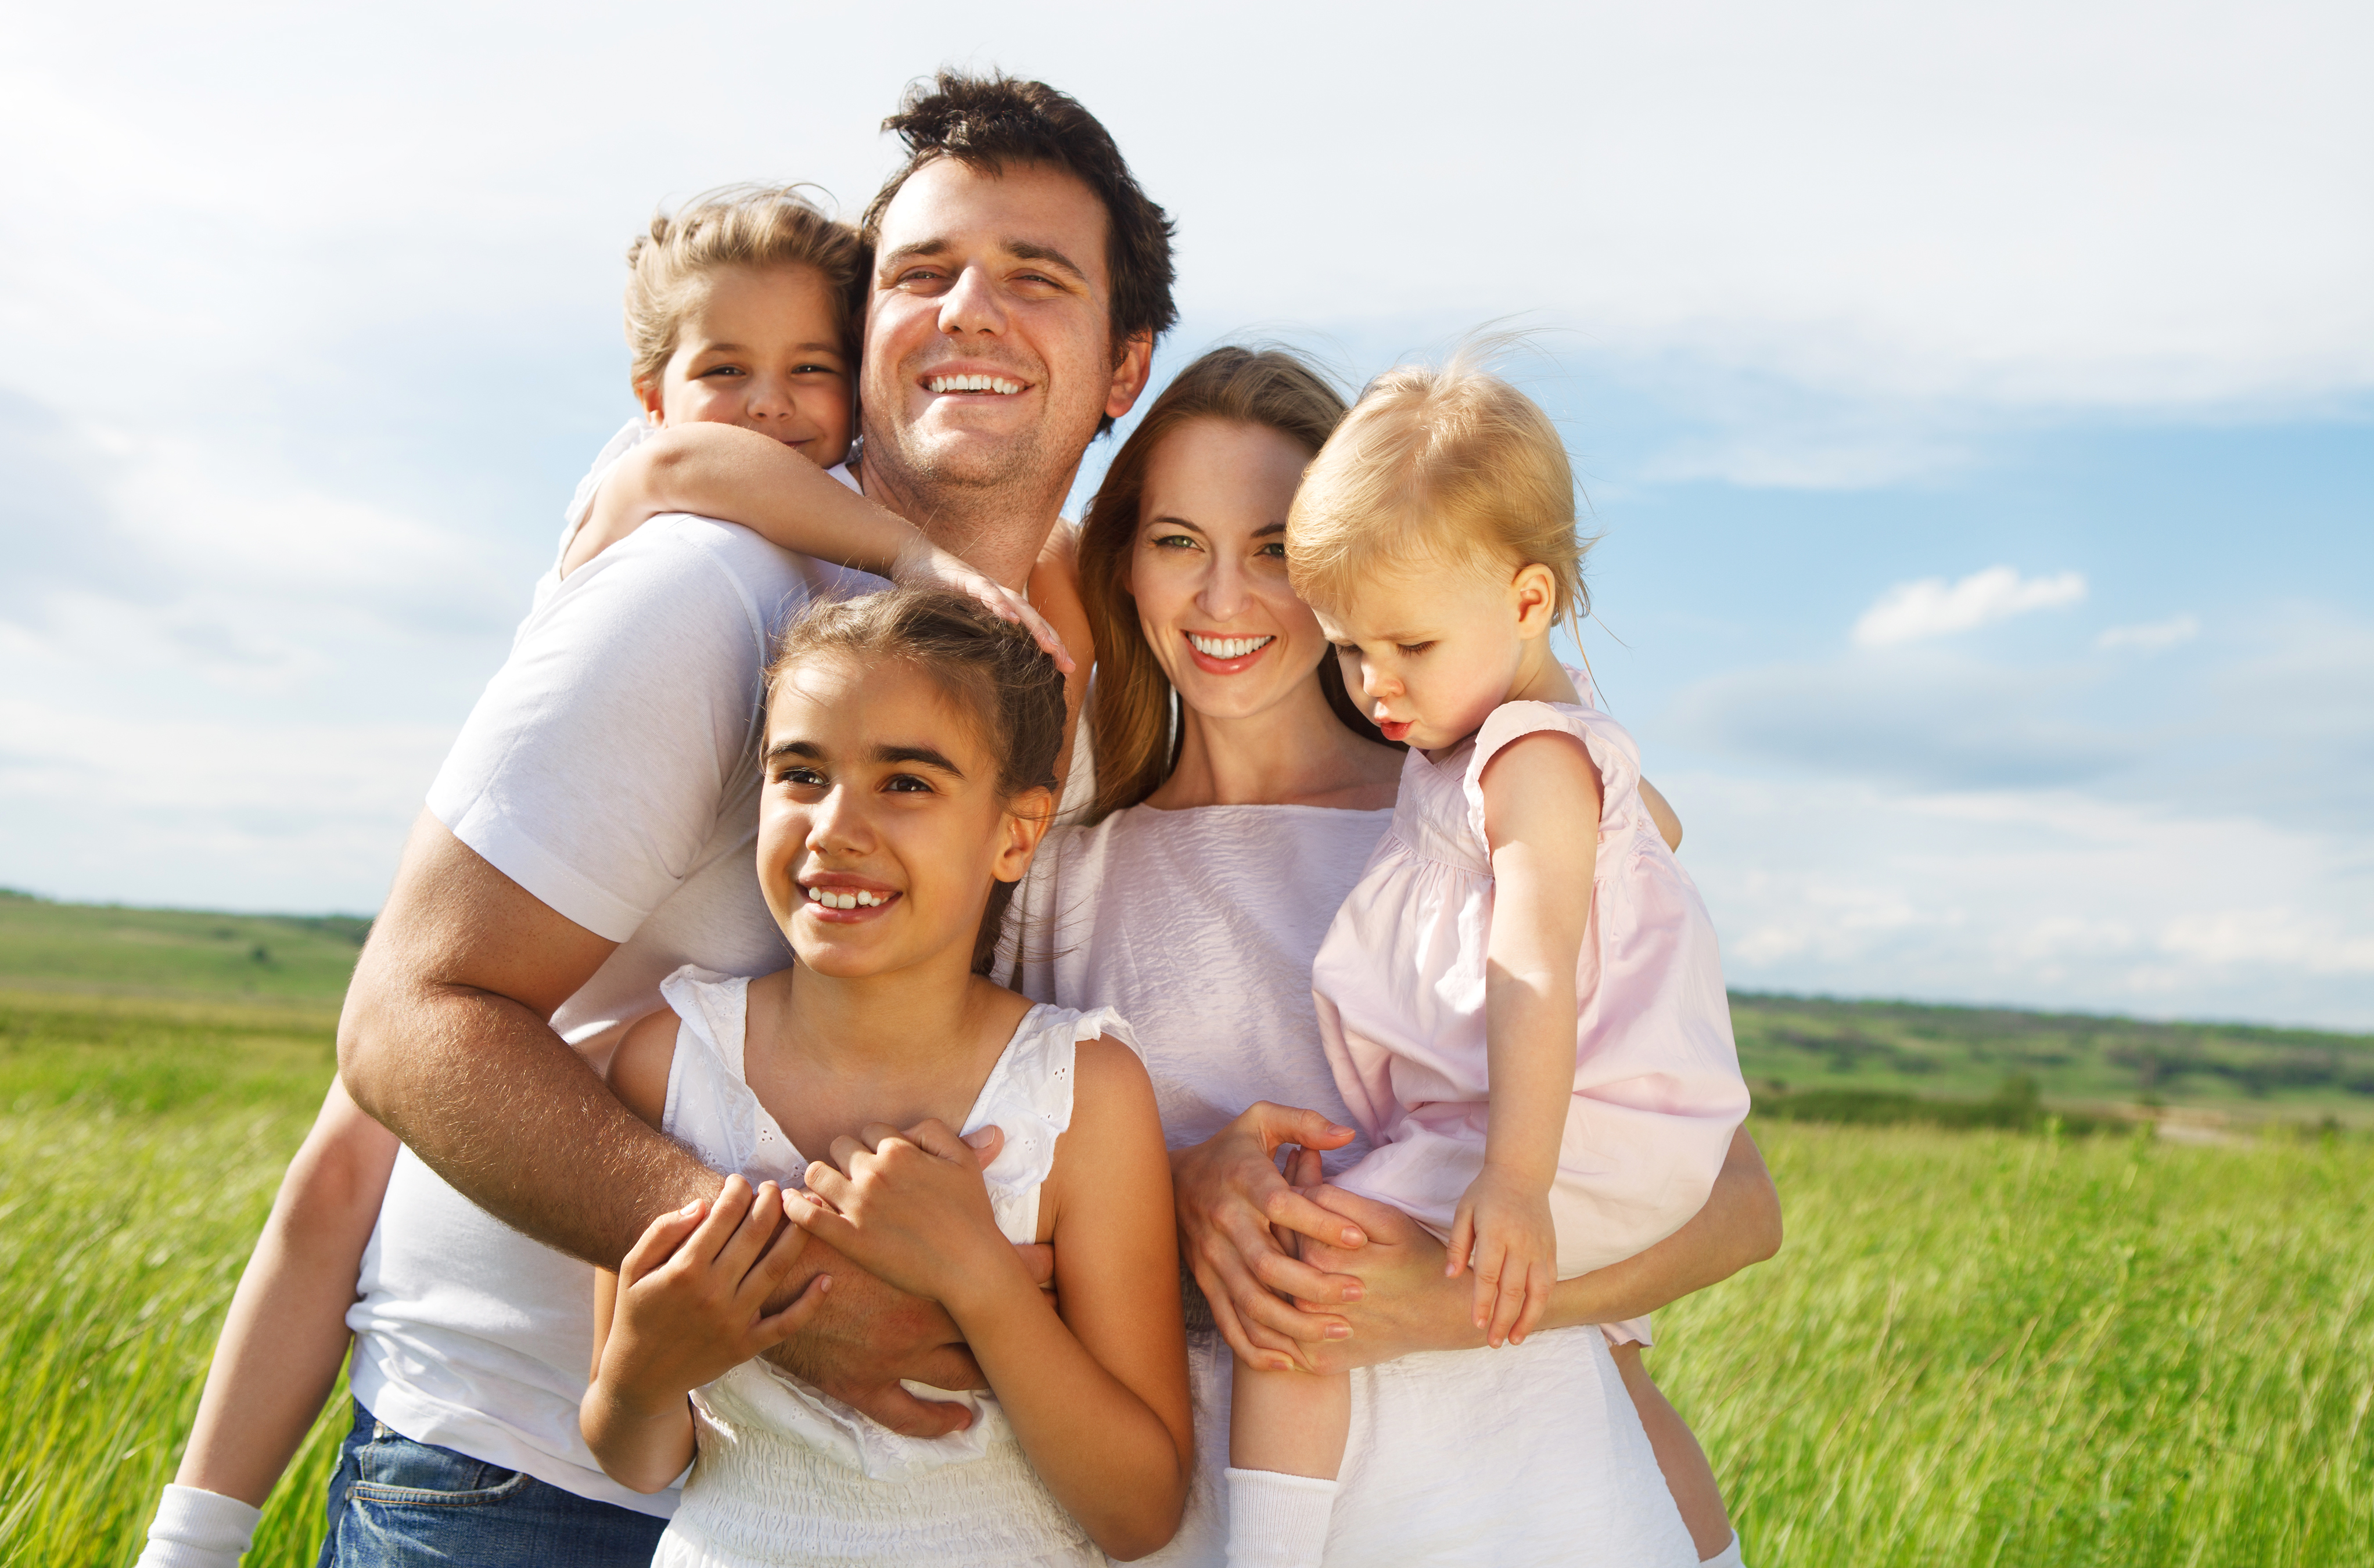 A happy couple with their three kids | Source: Shutterstock